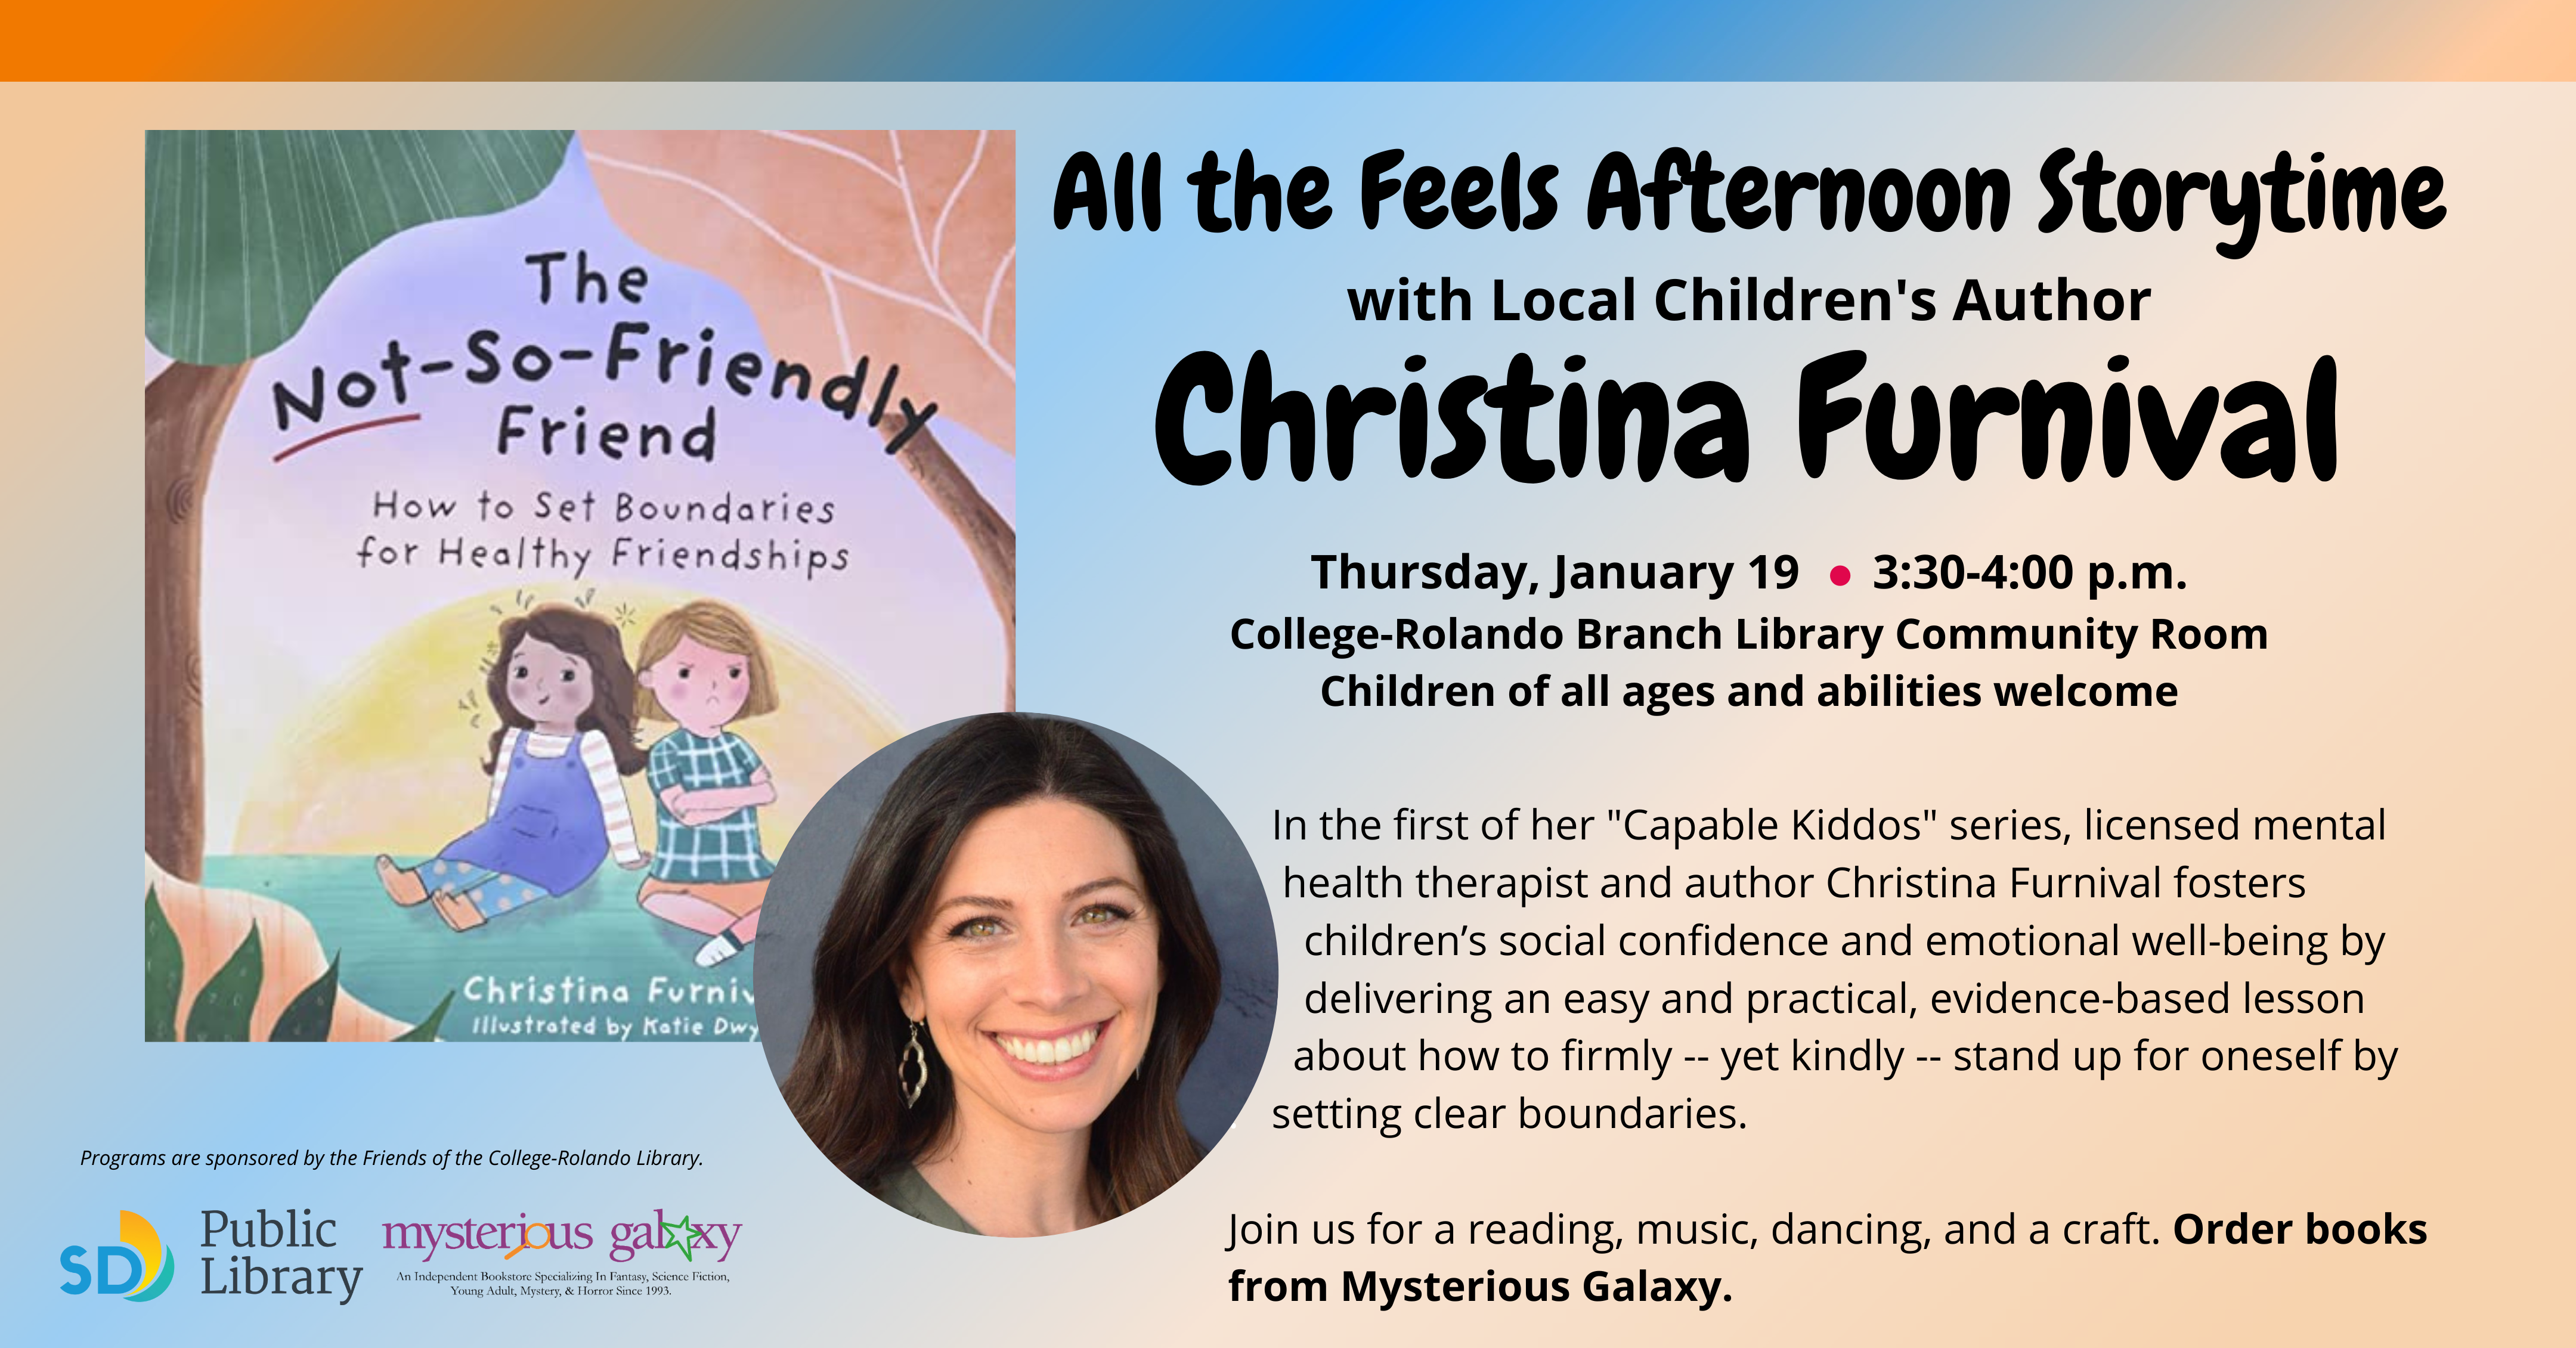 .   In the first of her "Capable Kiddos" series, licensed mental .    health therapist and author Christina Furnival fosters .      children’s social confidence and emotional well-being by .      delivering an easy and practical, evidence-based lesson .     about how to firmly -- yet kindly -- stand up for oneself by .   setting clear boundaries.   Join us for a reading, music, dancing, and a craft. Order books from Mysterious Galaxy. 